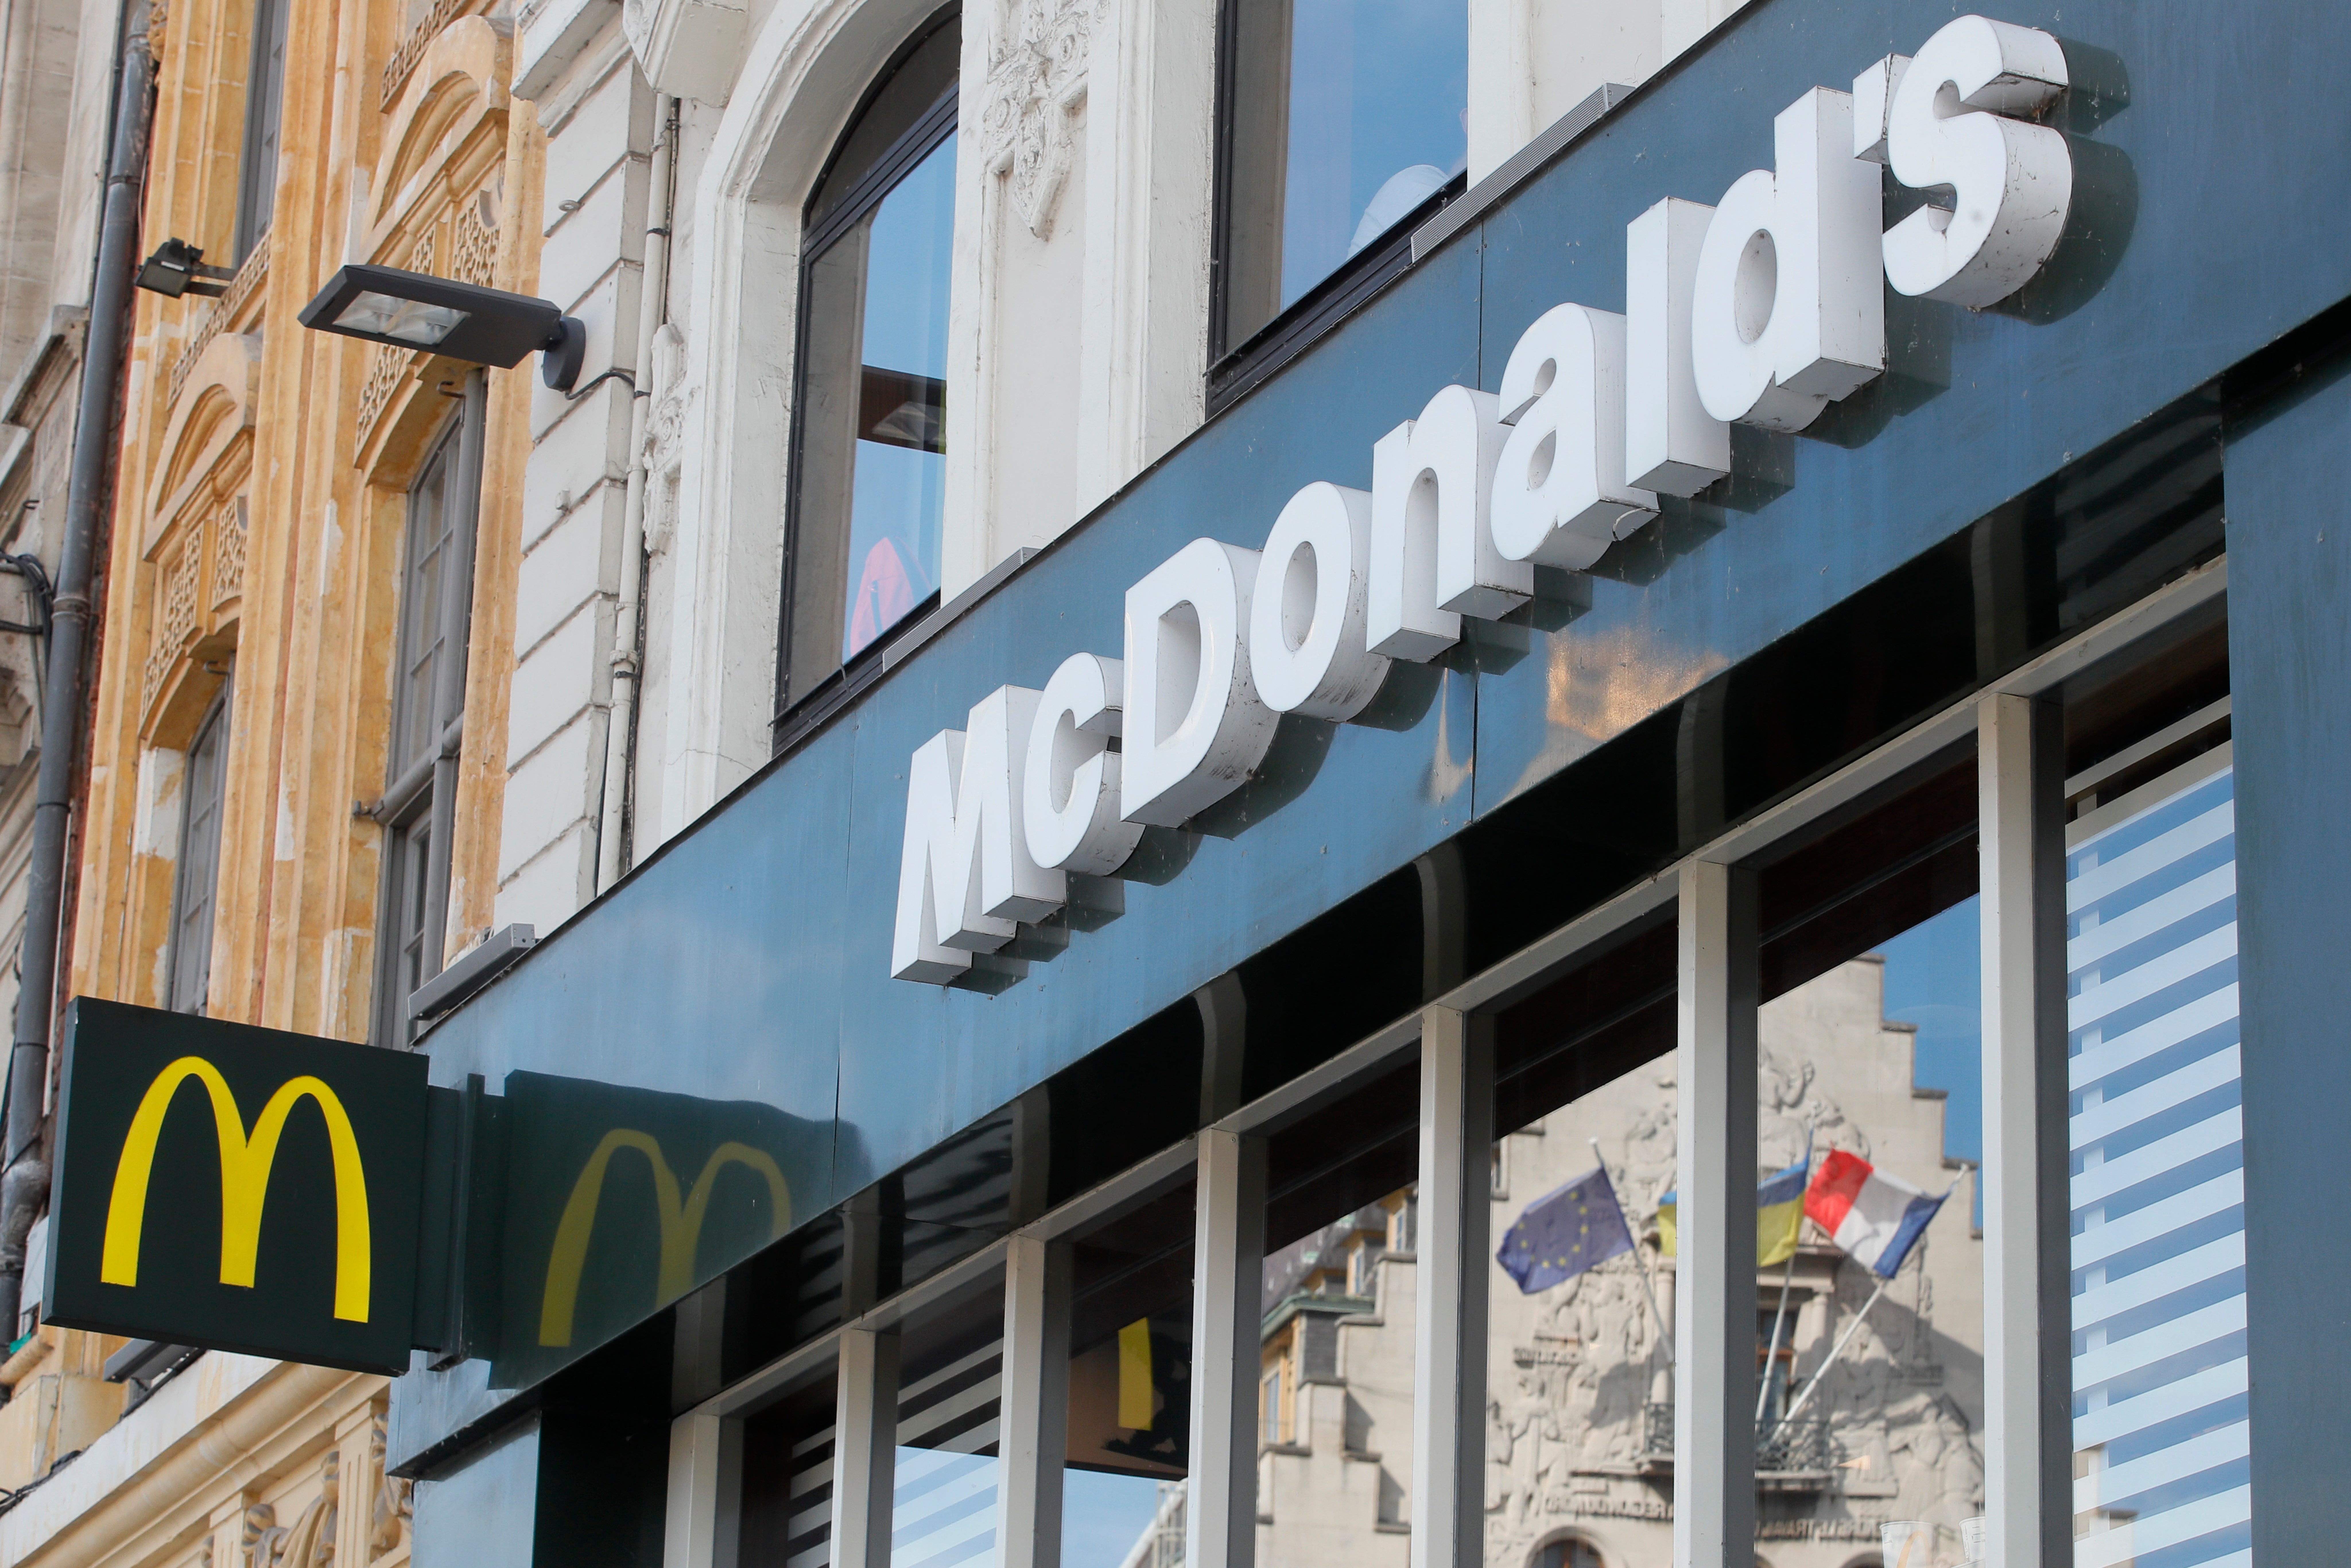 UberEats will not deliver McDonald’s food to schools in a bid to protect the health of young people